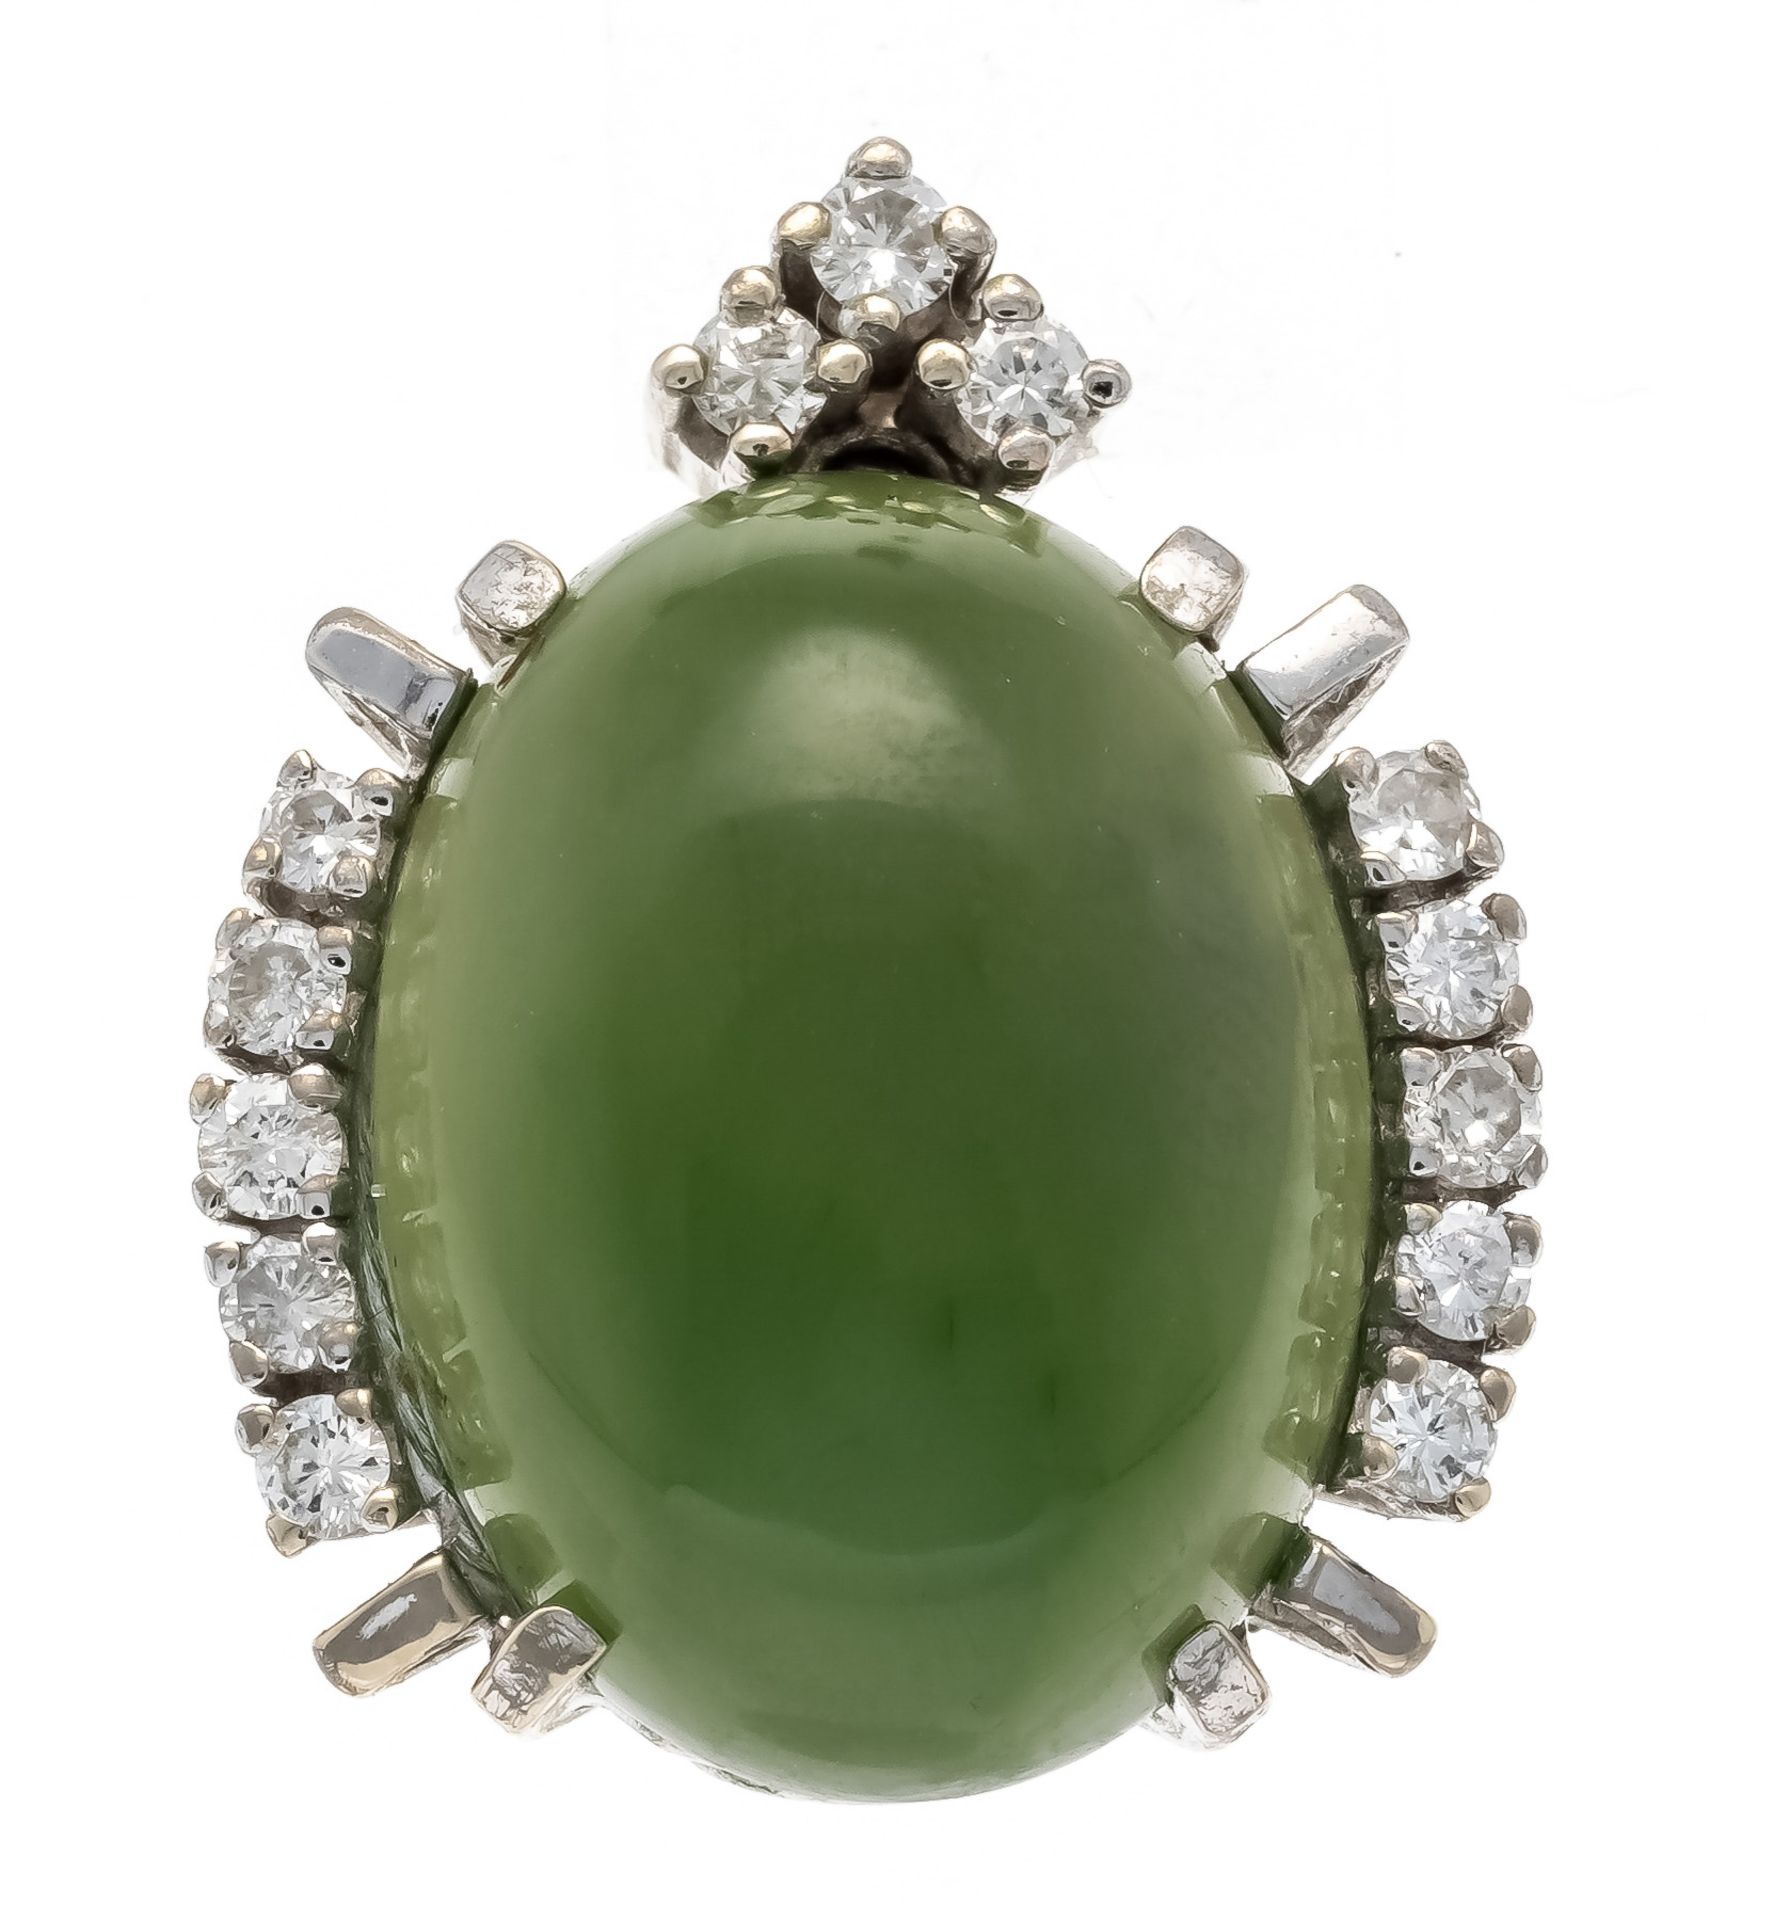 Jade diamond pendant WG 585/000 unstamped, tested, with an oval jade cabochon 19.5 x 14.7 mm, darker